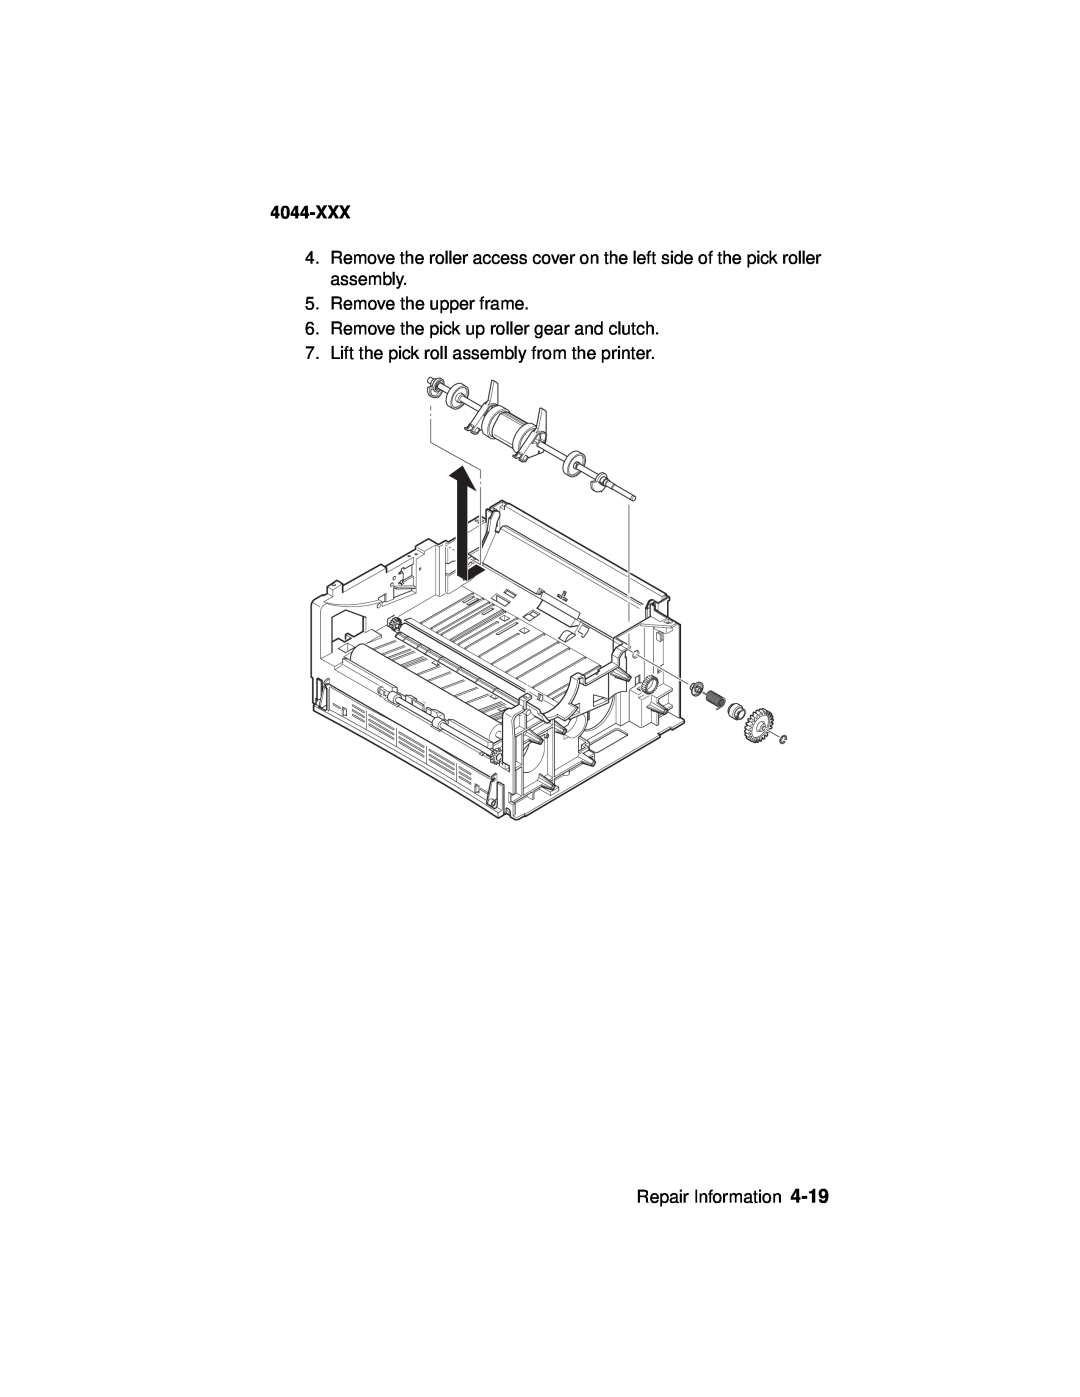 Lexmark E310 manual 4044-XXX, Remove the upper frame, Remove the pick up roller gear and clutch, Repair Information 